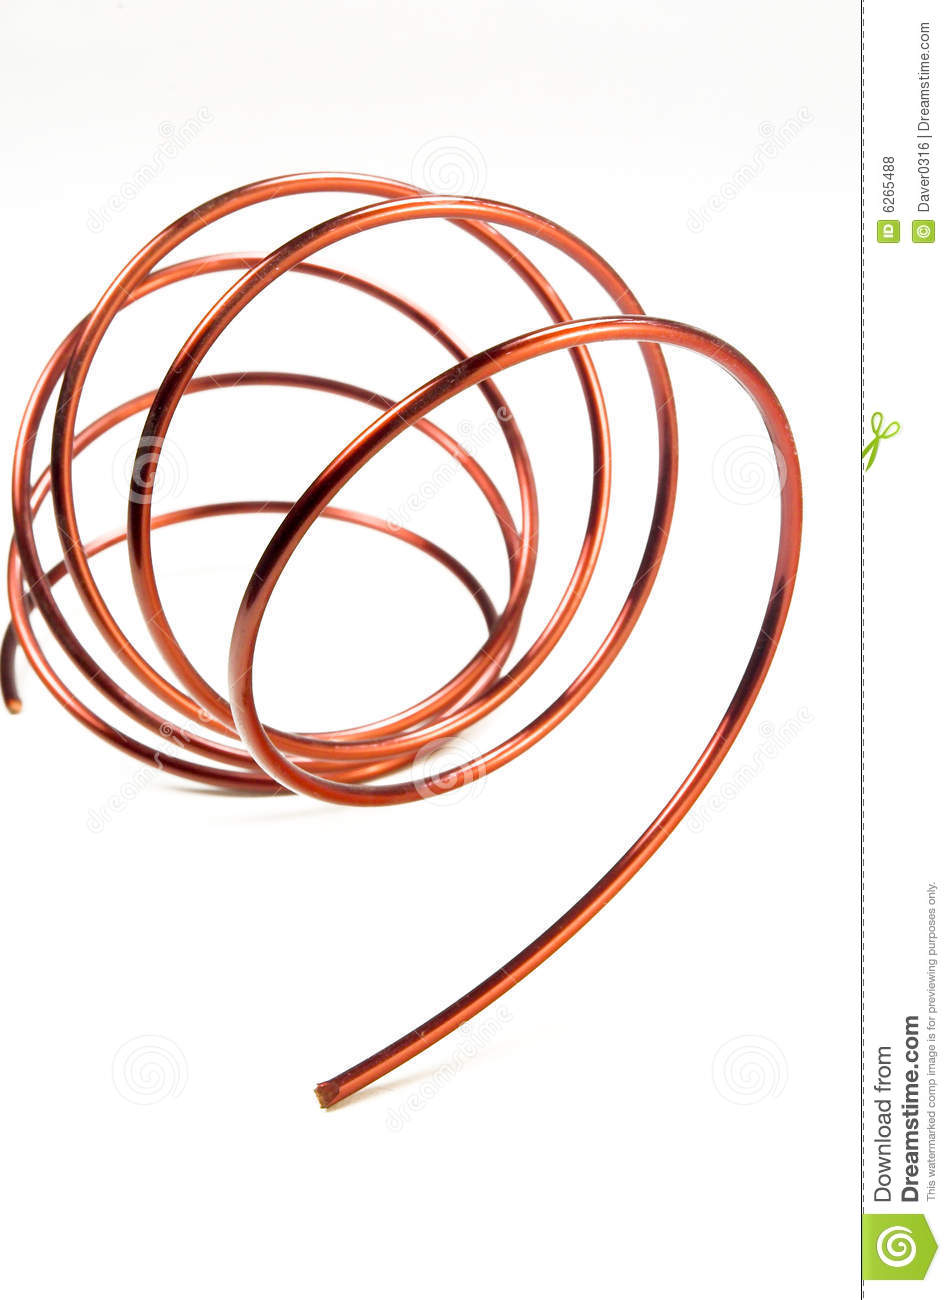 Copper Wire Royalty Free Stock Photos   Image  6265488